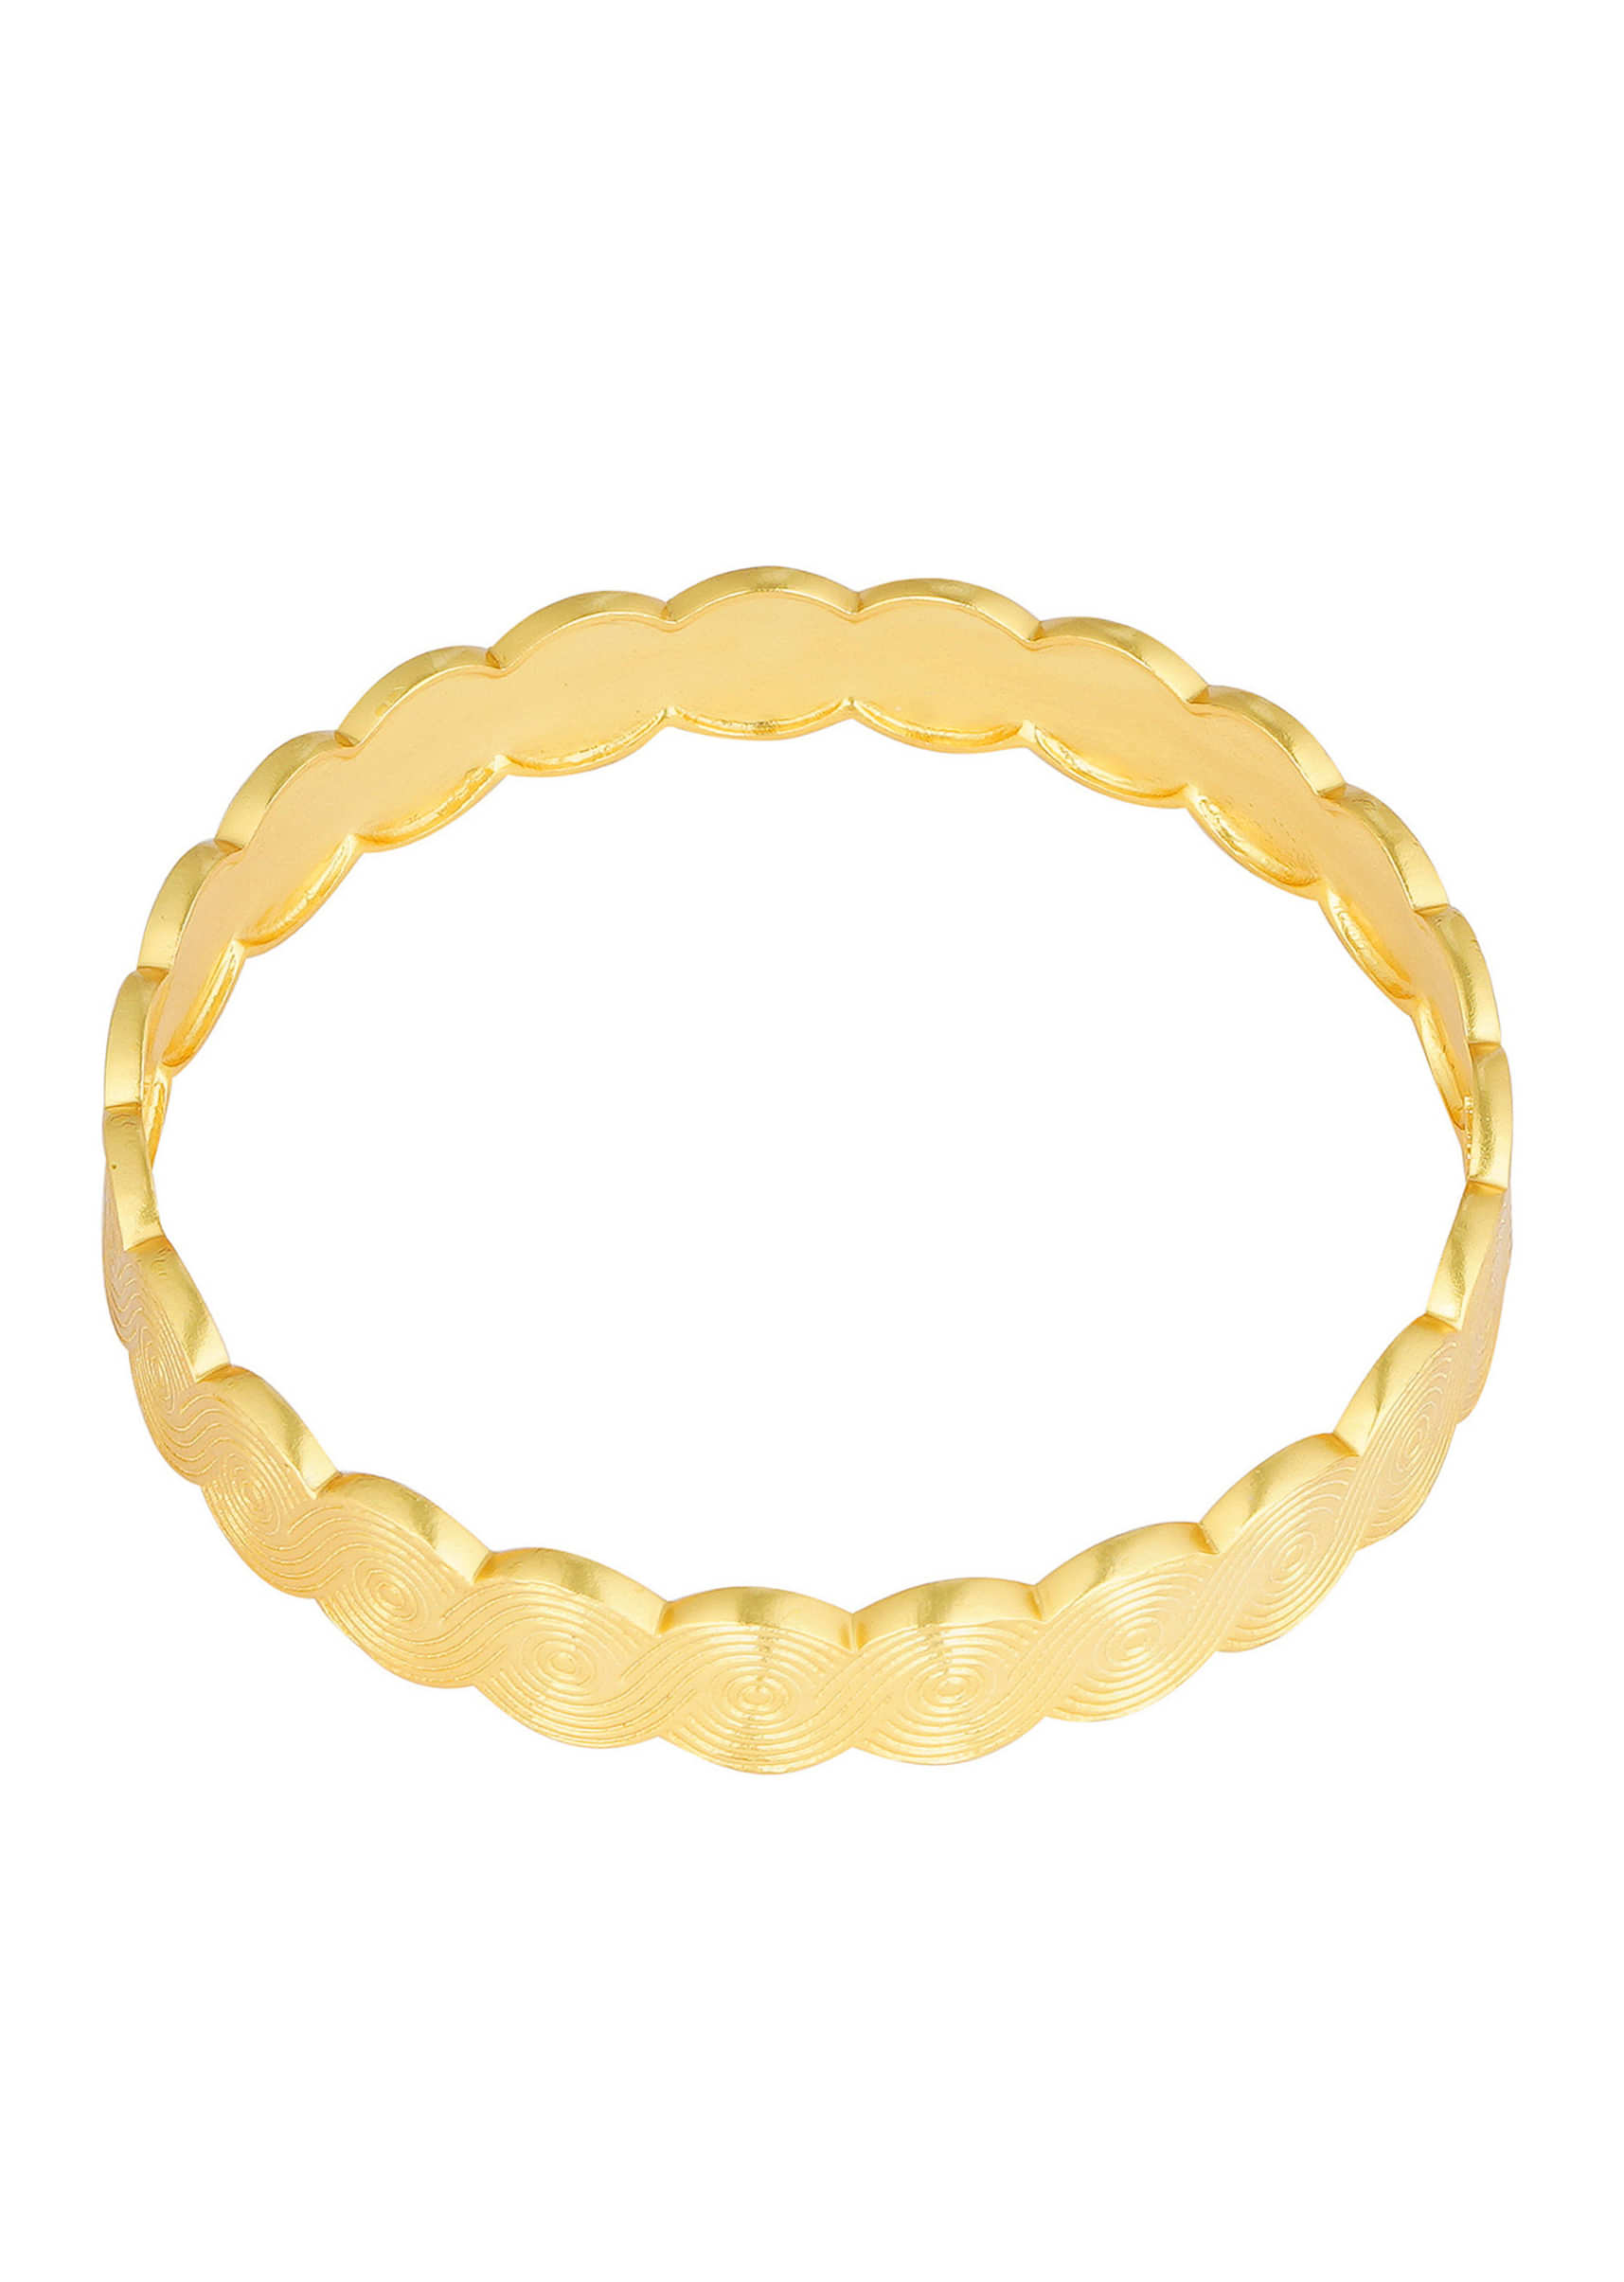 Gold Plated Adjustable Bangle With A Minimalistic Carved Design